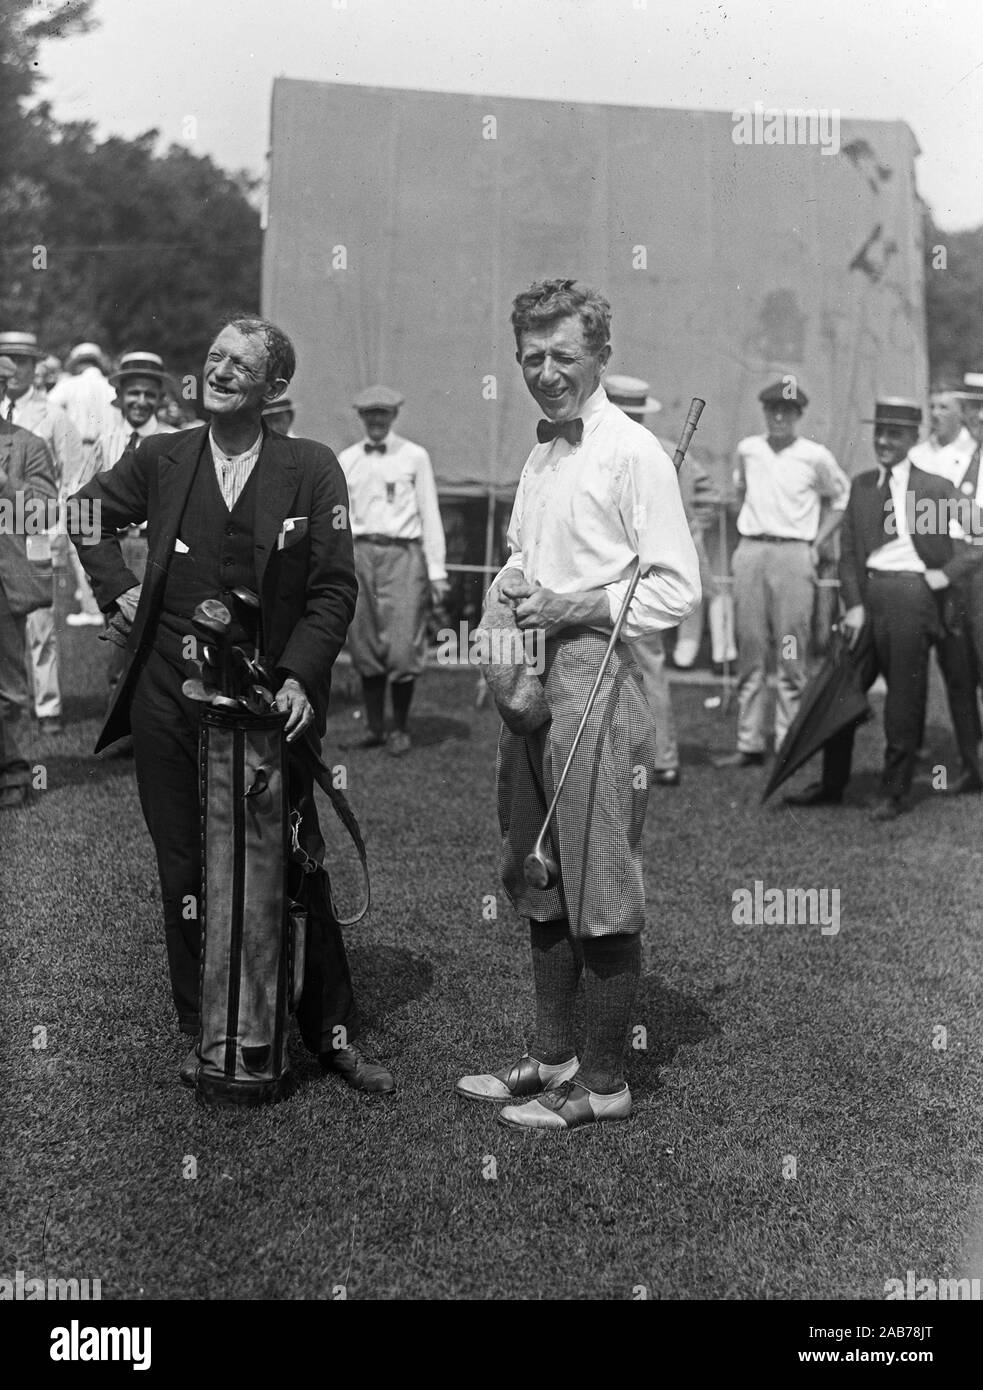 Vintage golf photo - A golfer and his caddie at a golf tournament ca. 1921-1923 Stock Photo